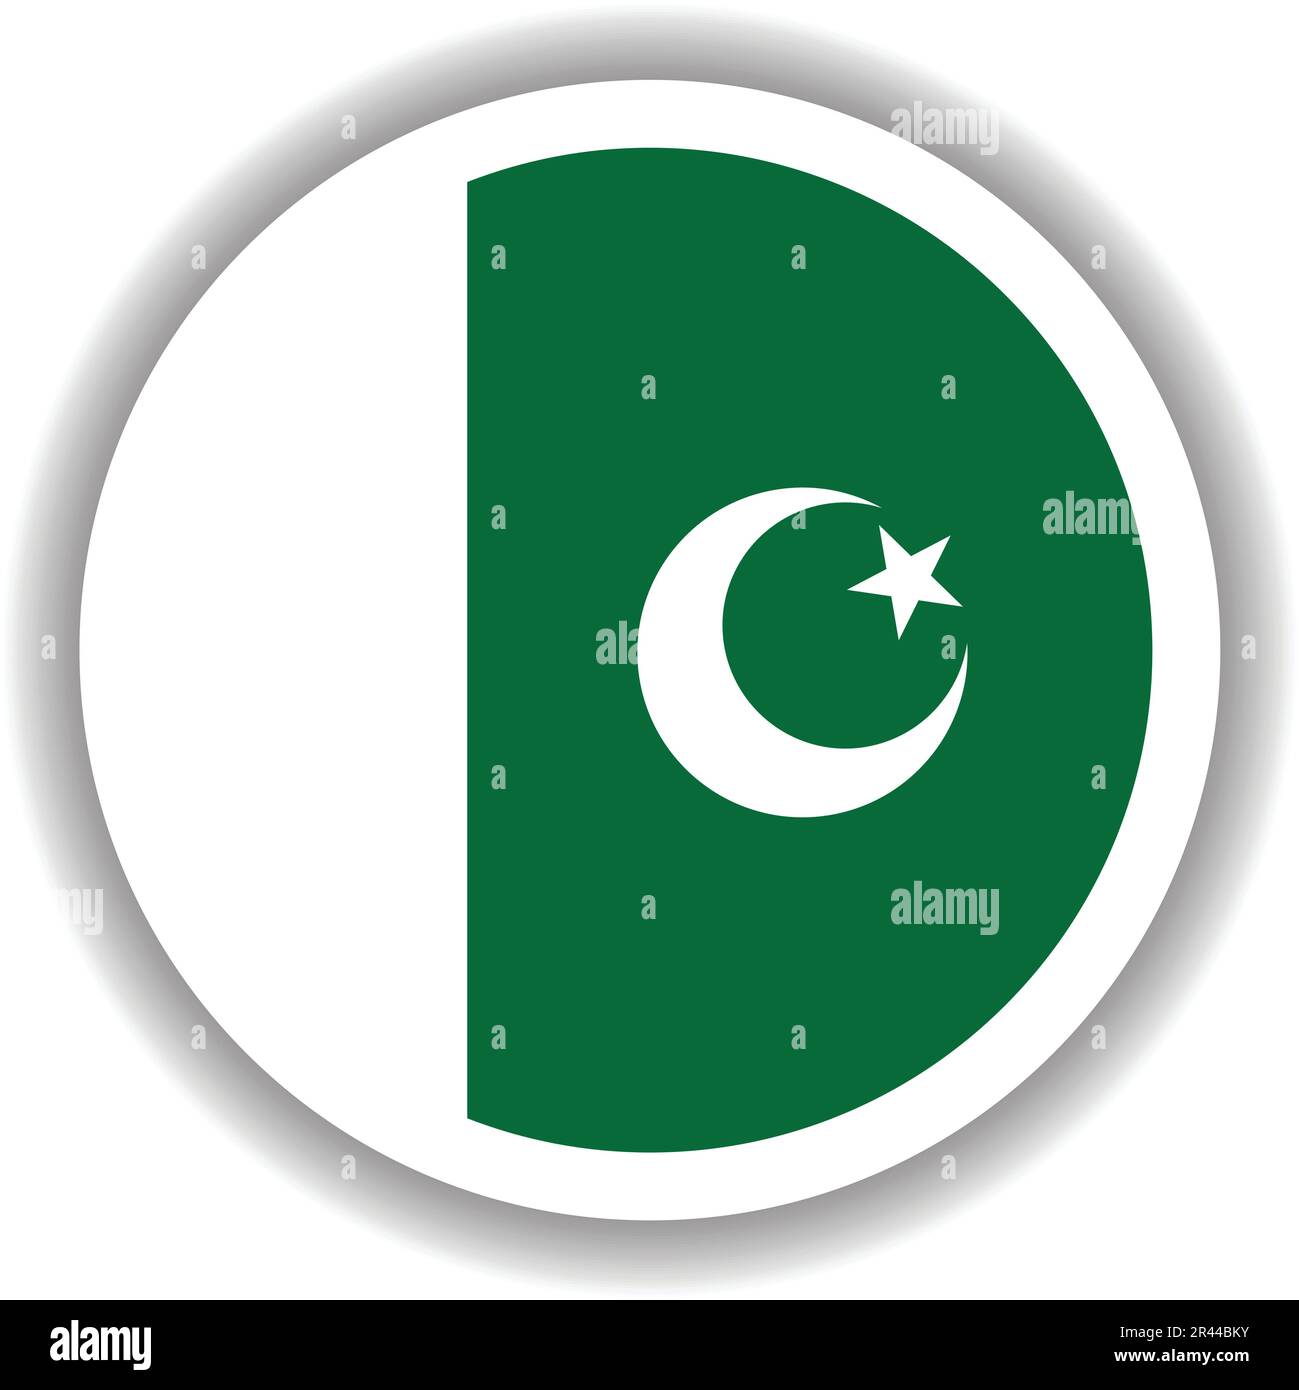 Pakistan south africa Cut Out Stock Images & Pictures - Alamy